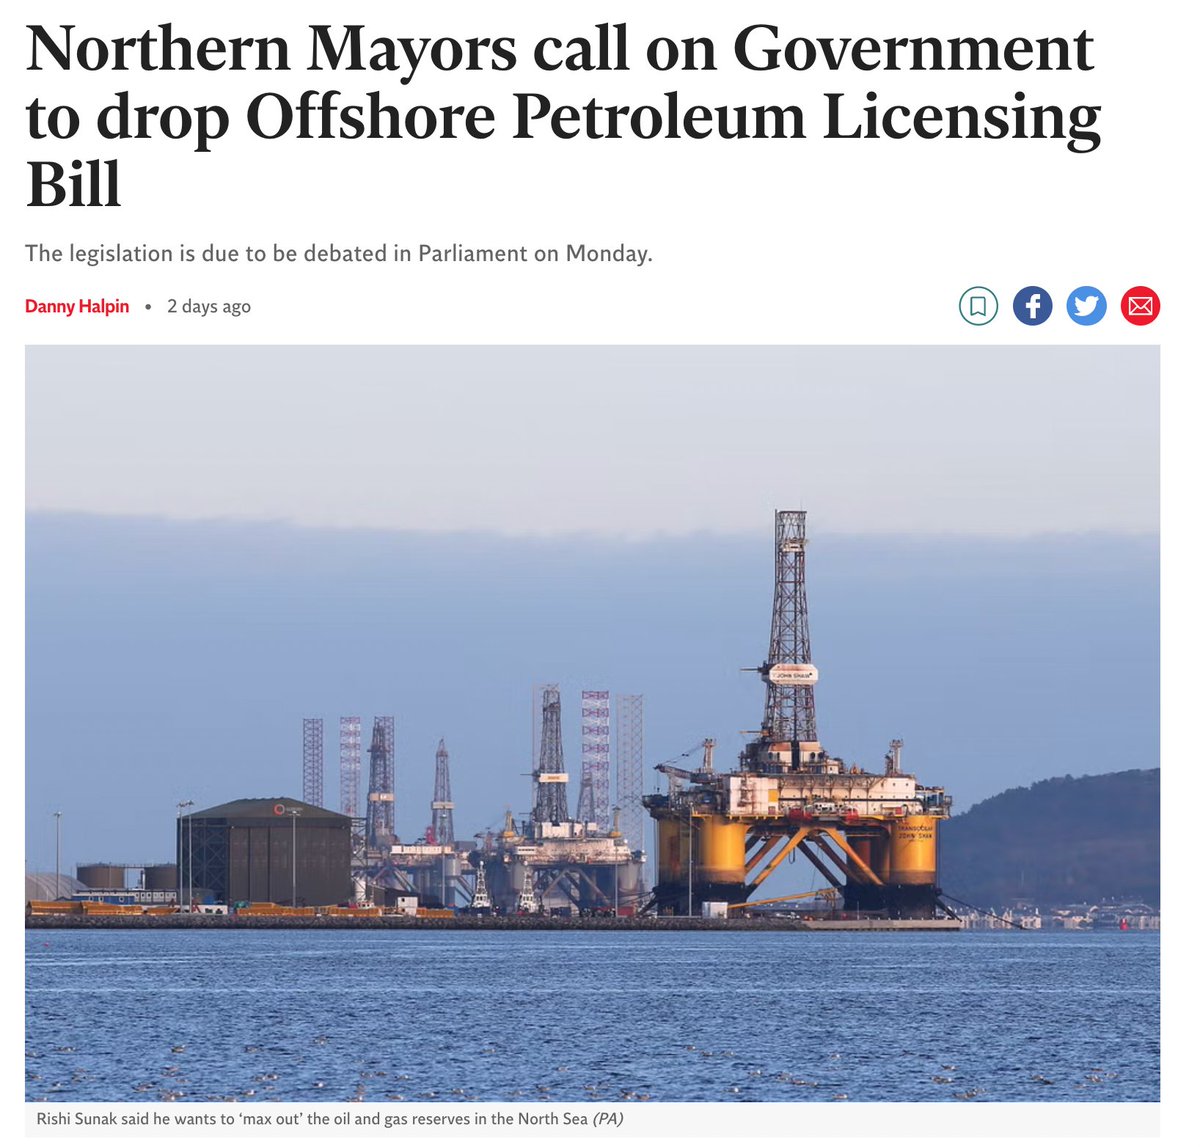 NEW: Northern Mayors have spoken out against the government's climate-wrecking Offshore Petroleum Licensing Bill, which would lock us into decades of fossil fuel dependency. The bill will be debated today - write to your MP now 👇 actionnetwork.org/letters/join-t…